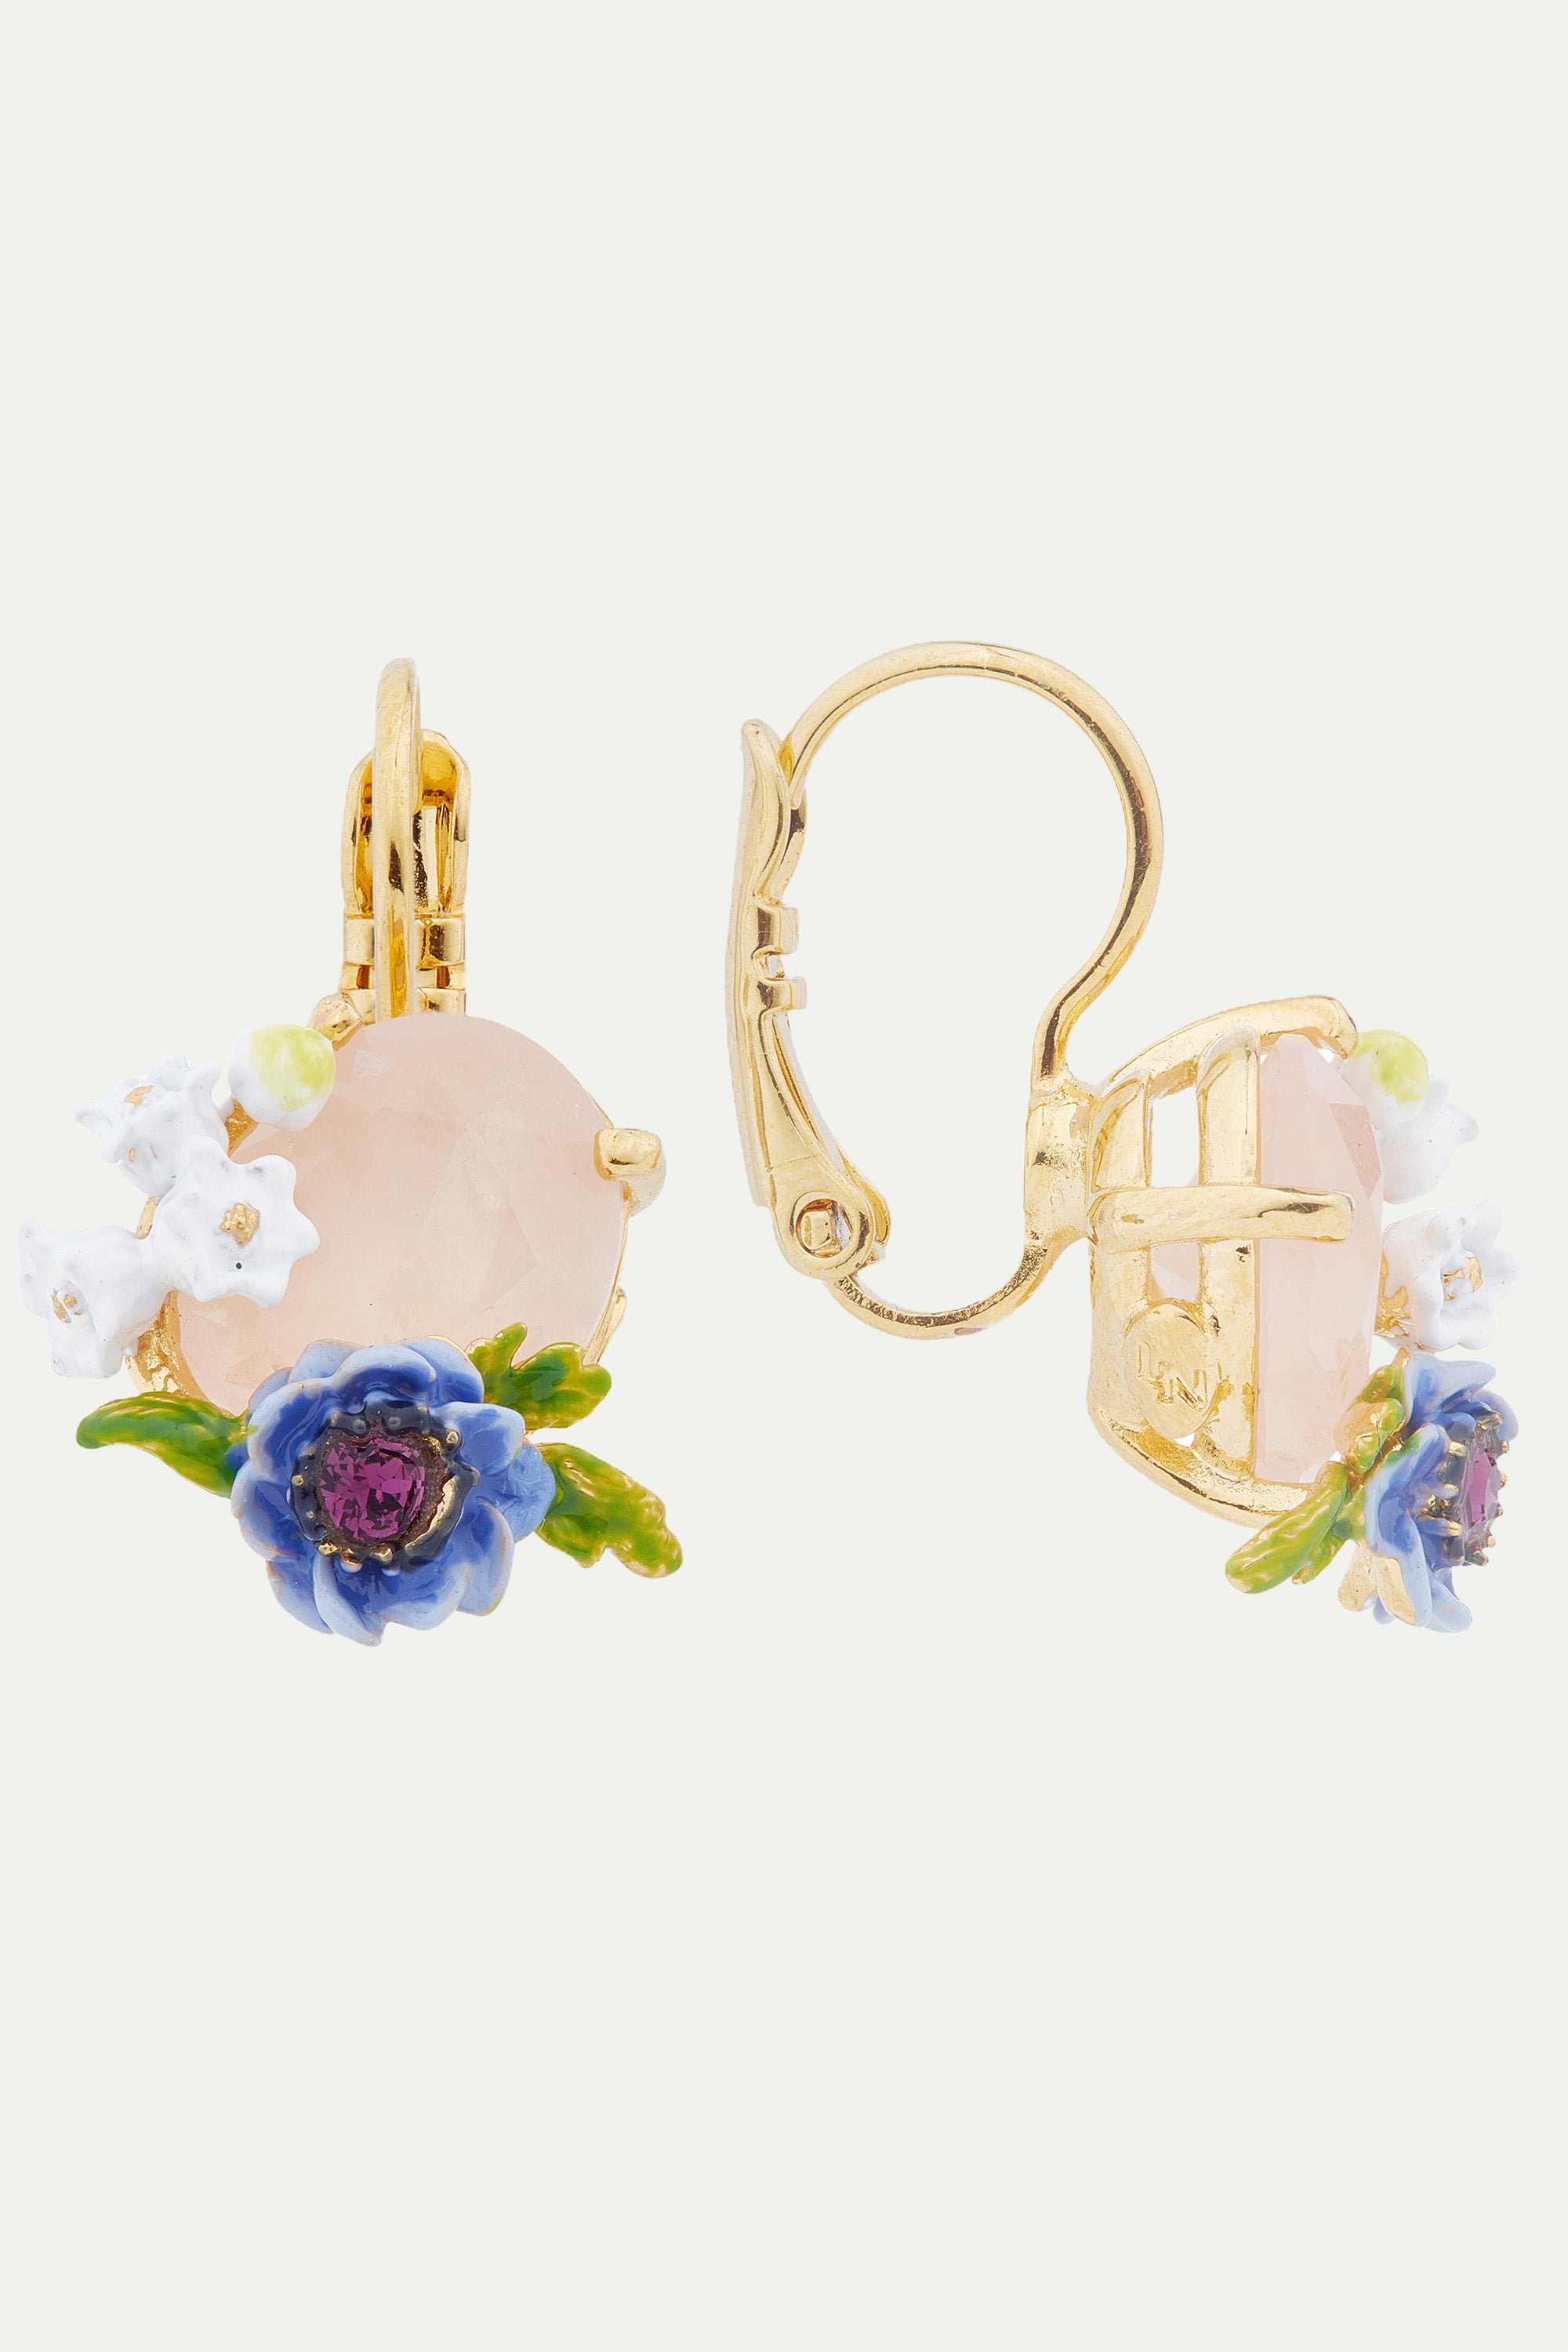 Rose quartz and floral composition sleeper earrings